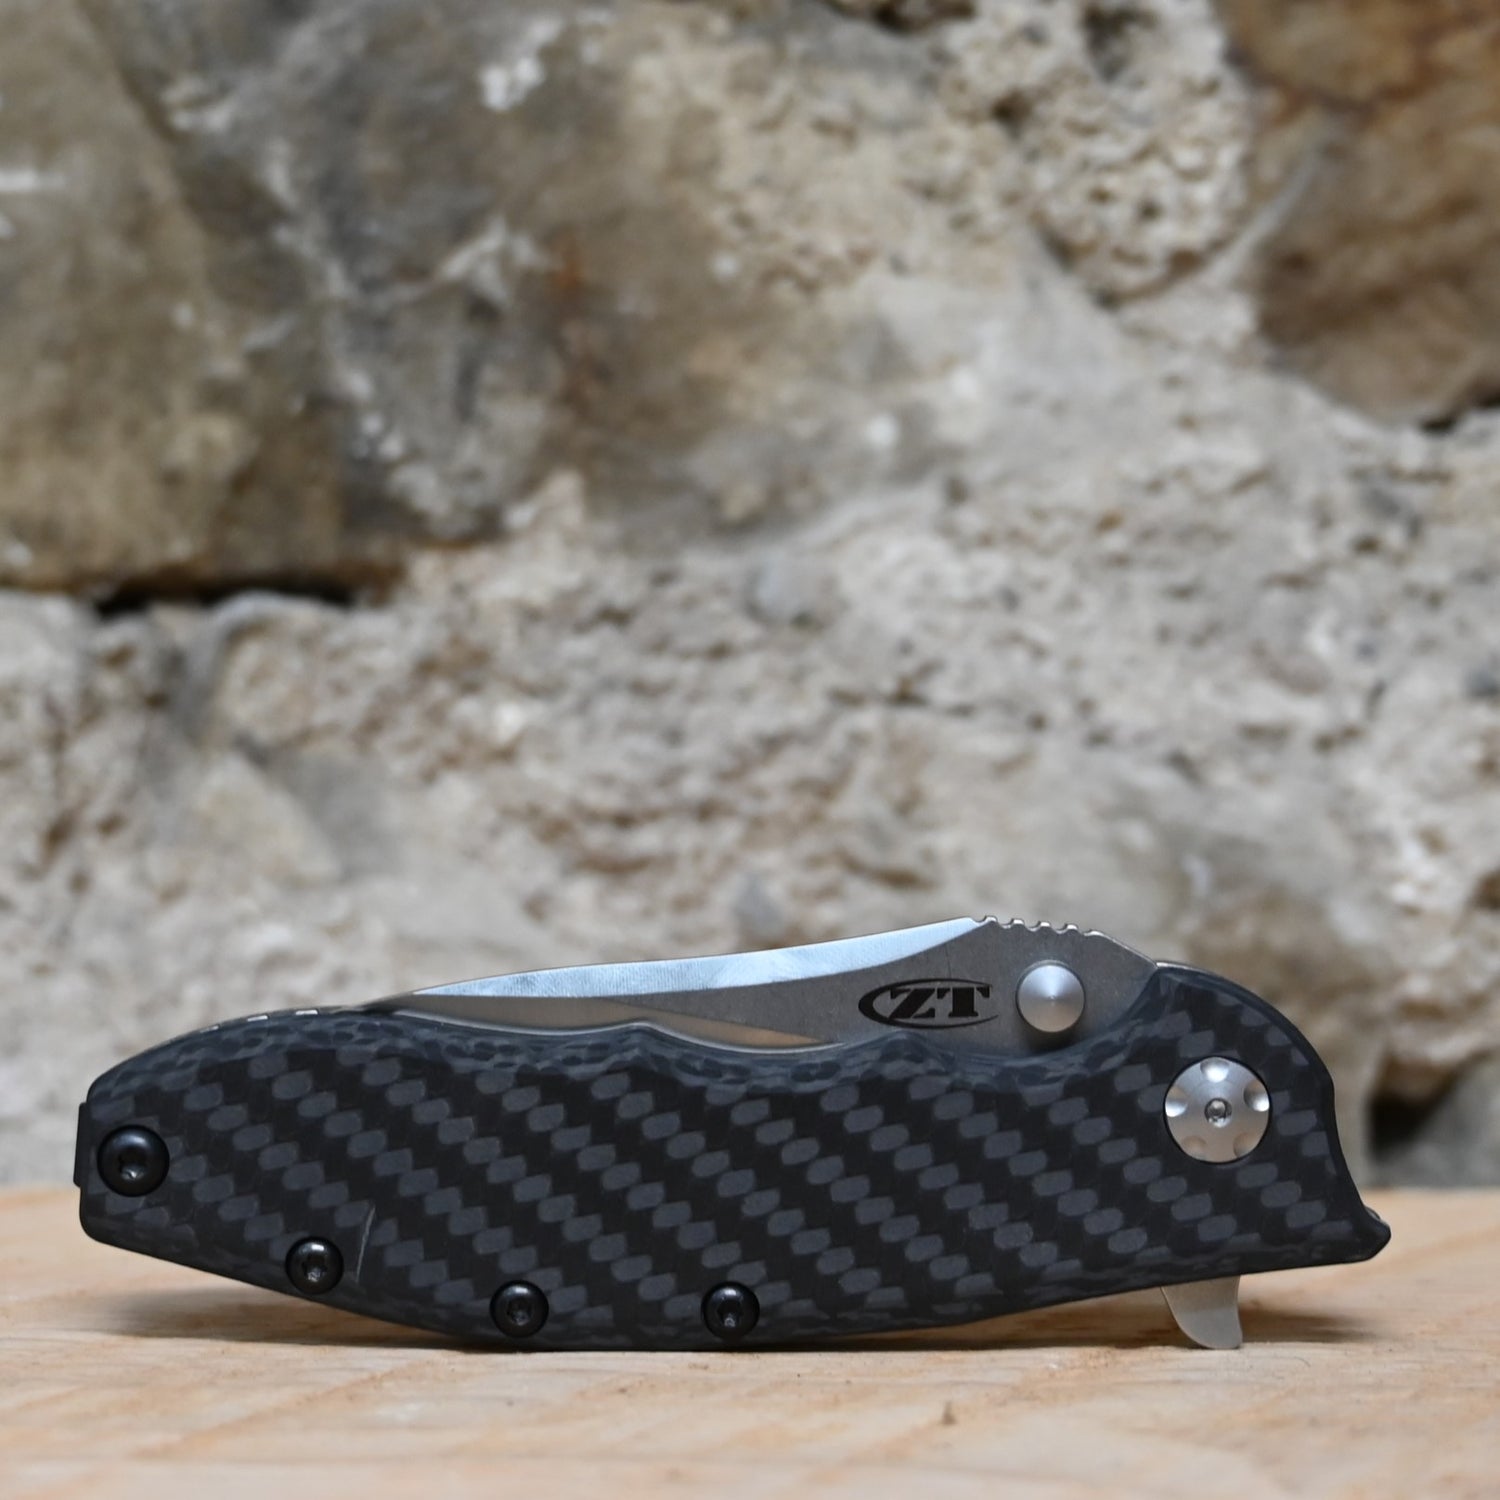 Zero Tolerance Hinderer KVT SW view of knife closed